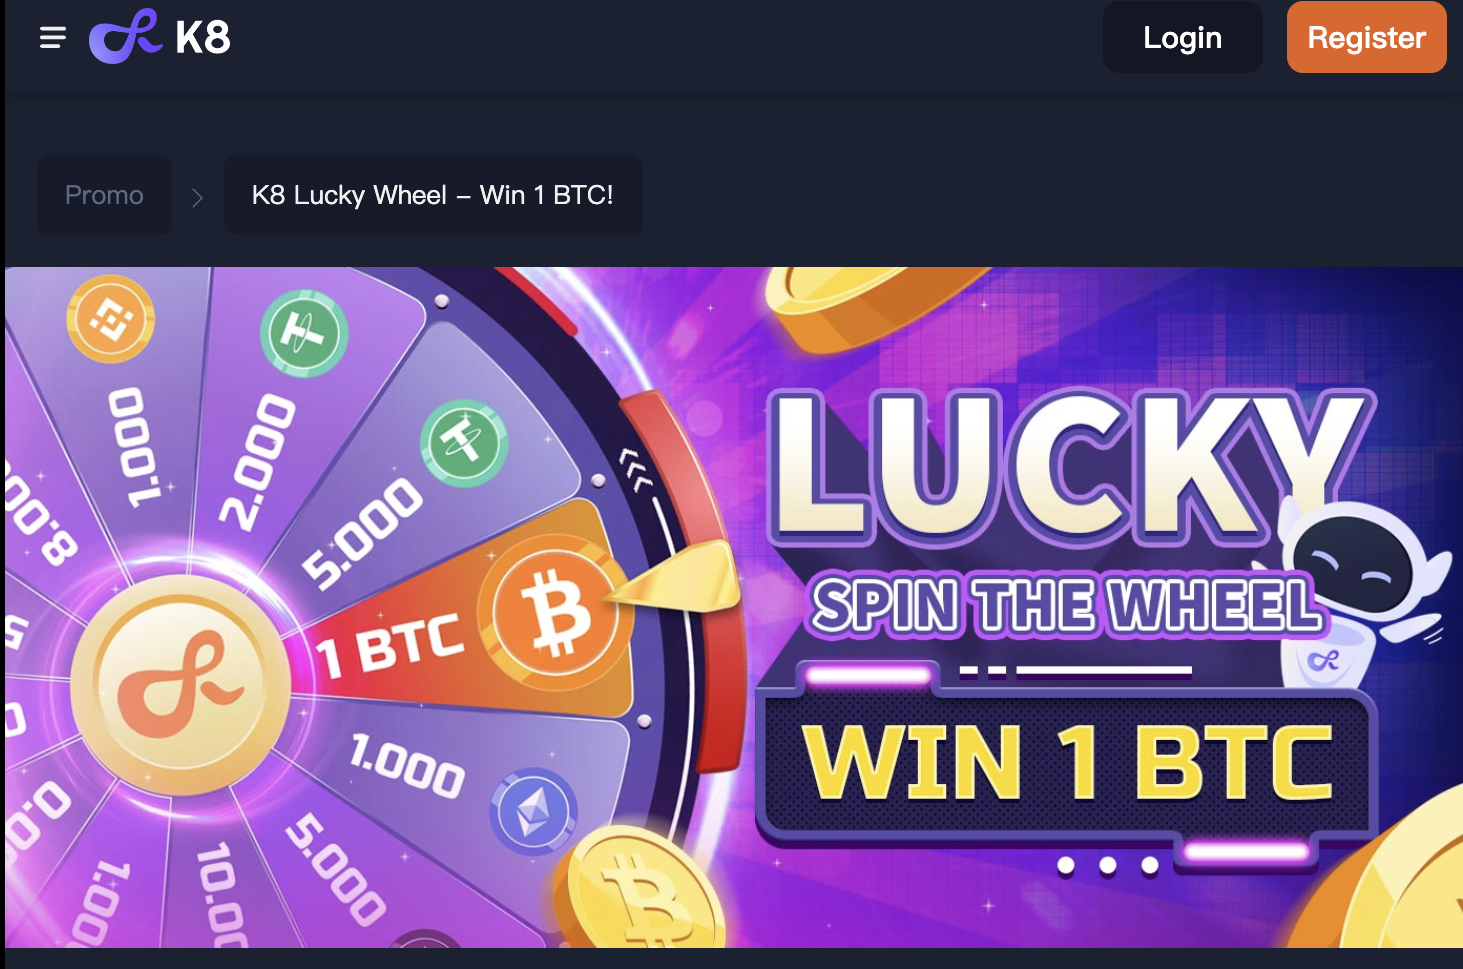 How To Win Friends And Influence People with crypto casino guides